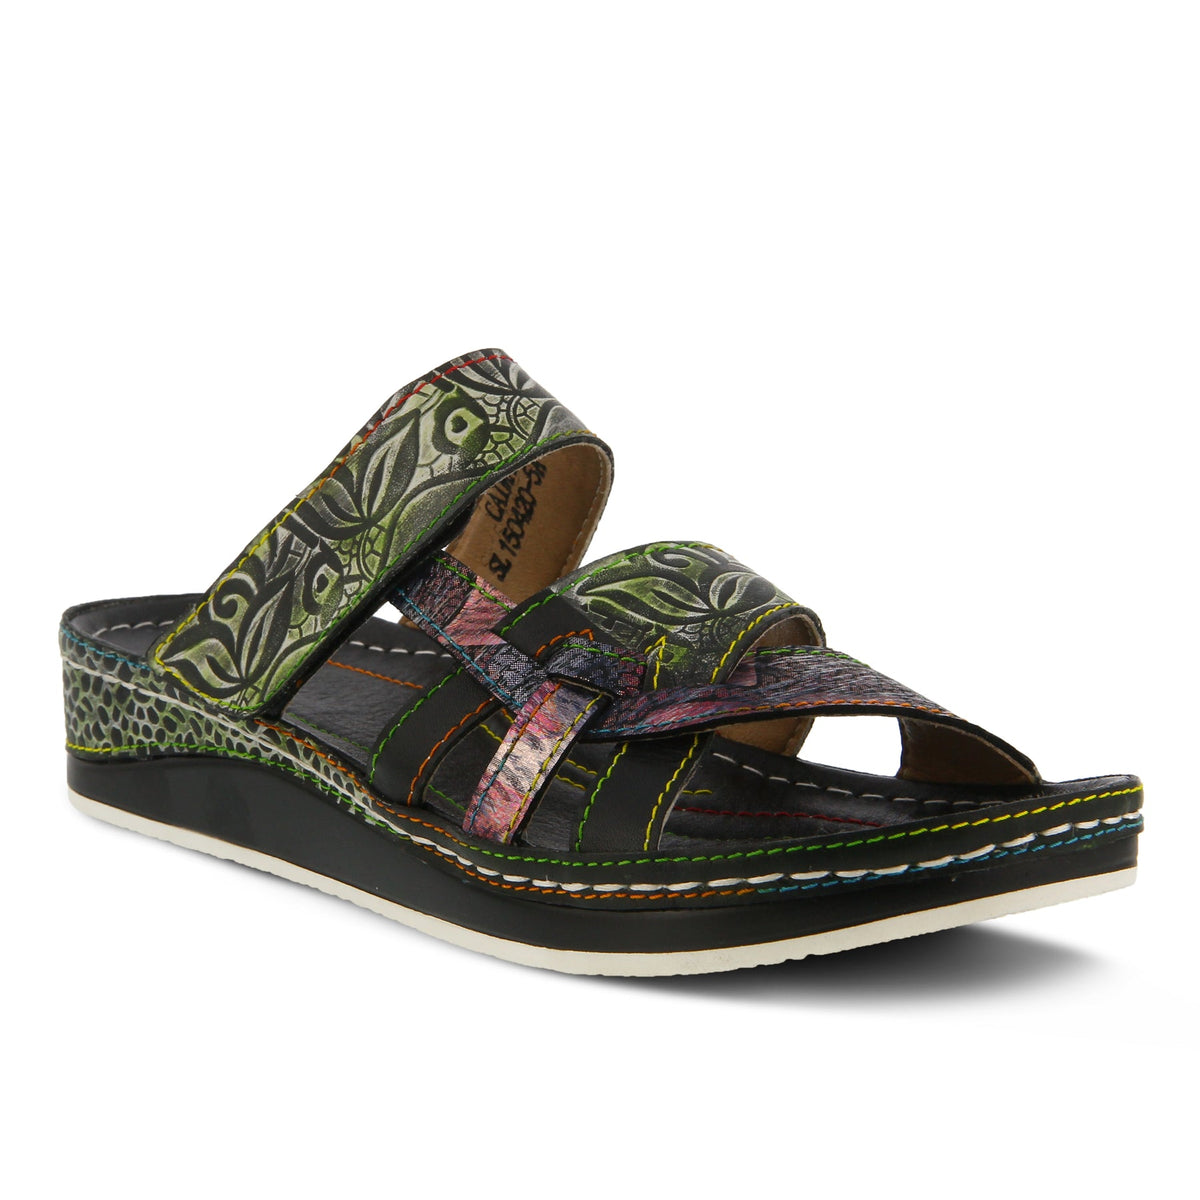 Black Multi Colored Floral Leather Womens Slide Sandal Rainbow Contrast Stitching French European Shoe